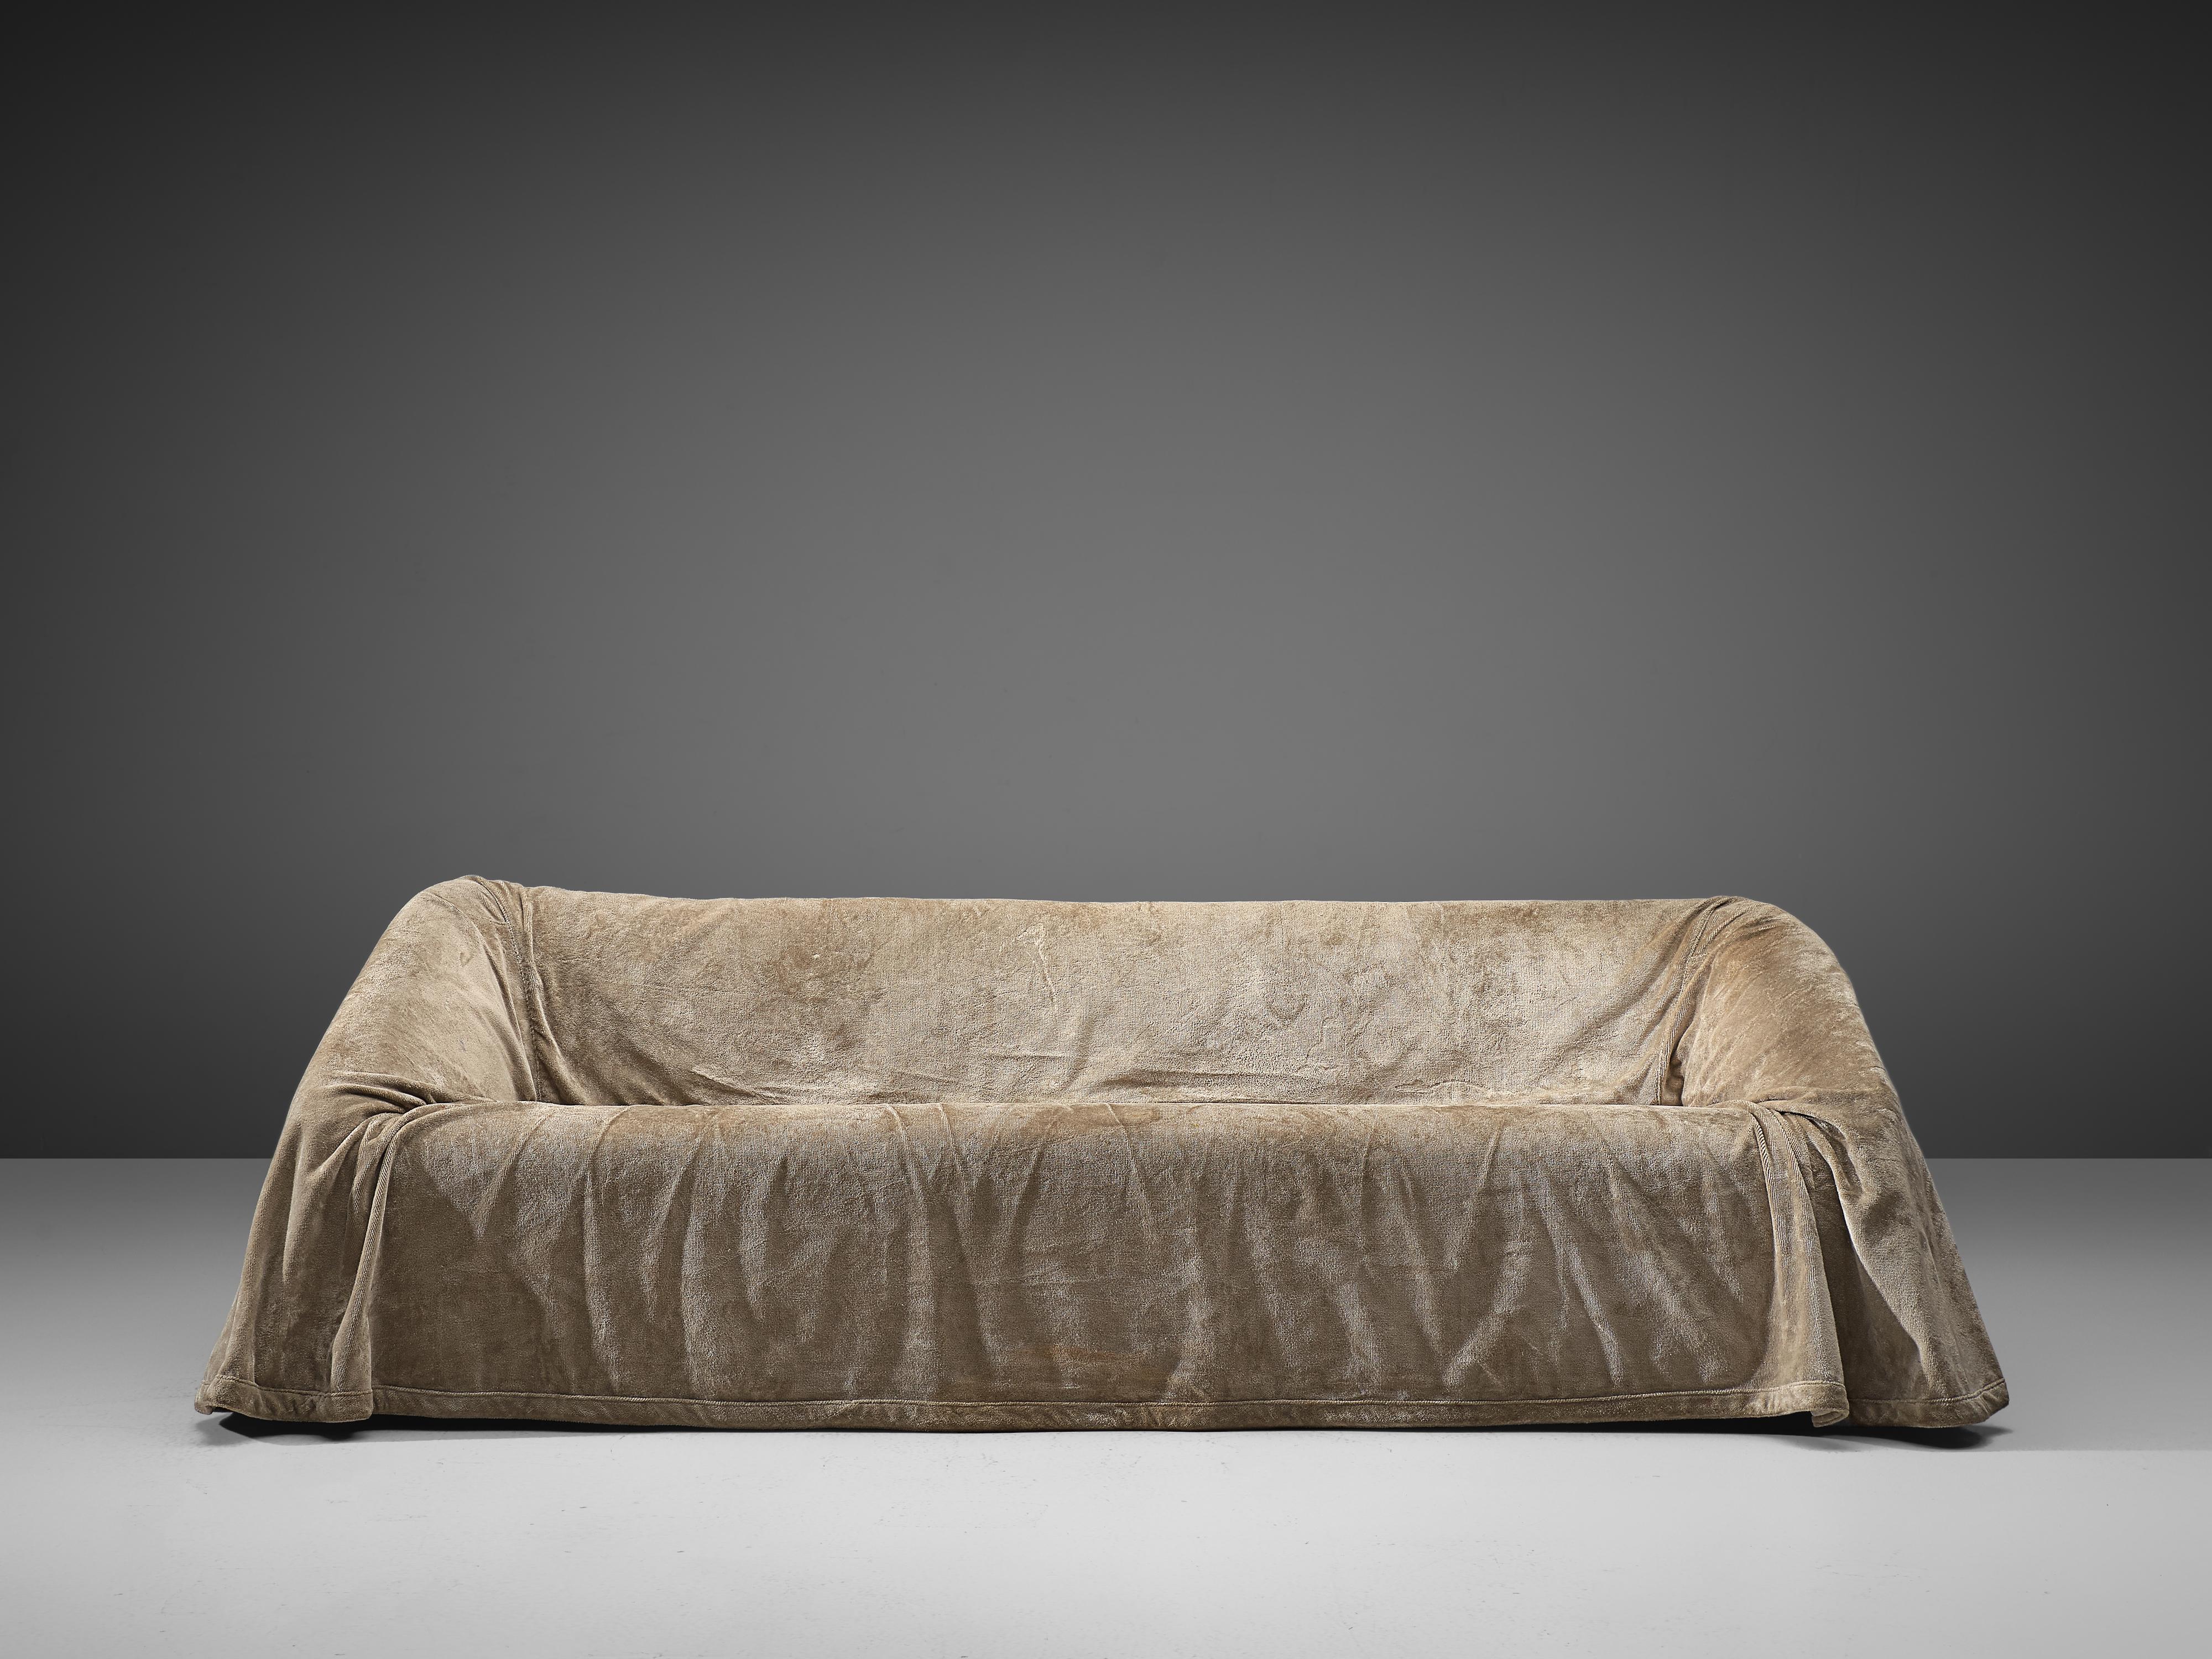 Kazuhide Takahama, 'Mantilla' sofa model 225, velvet, Italy, design 1973

Stunning 'Mantilla' sofa by Japanese designer Kazuhide Takahama designed in 1973. The name 'Mantilla' was given by Takahama due to the fact that the fabric covers up the